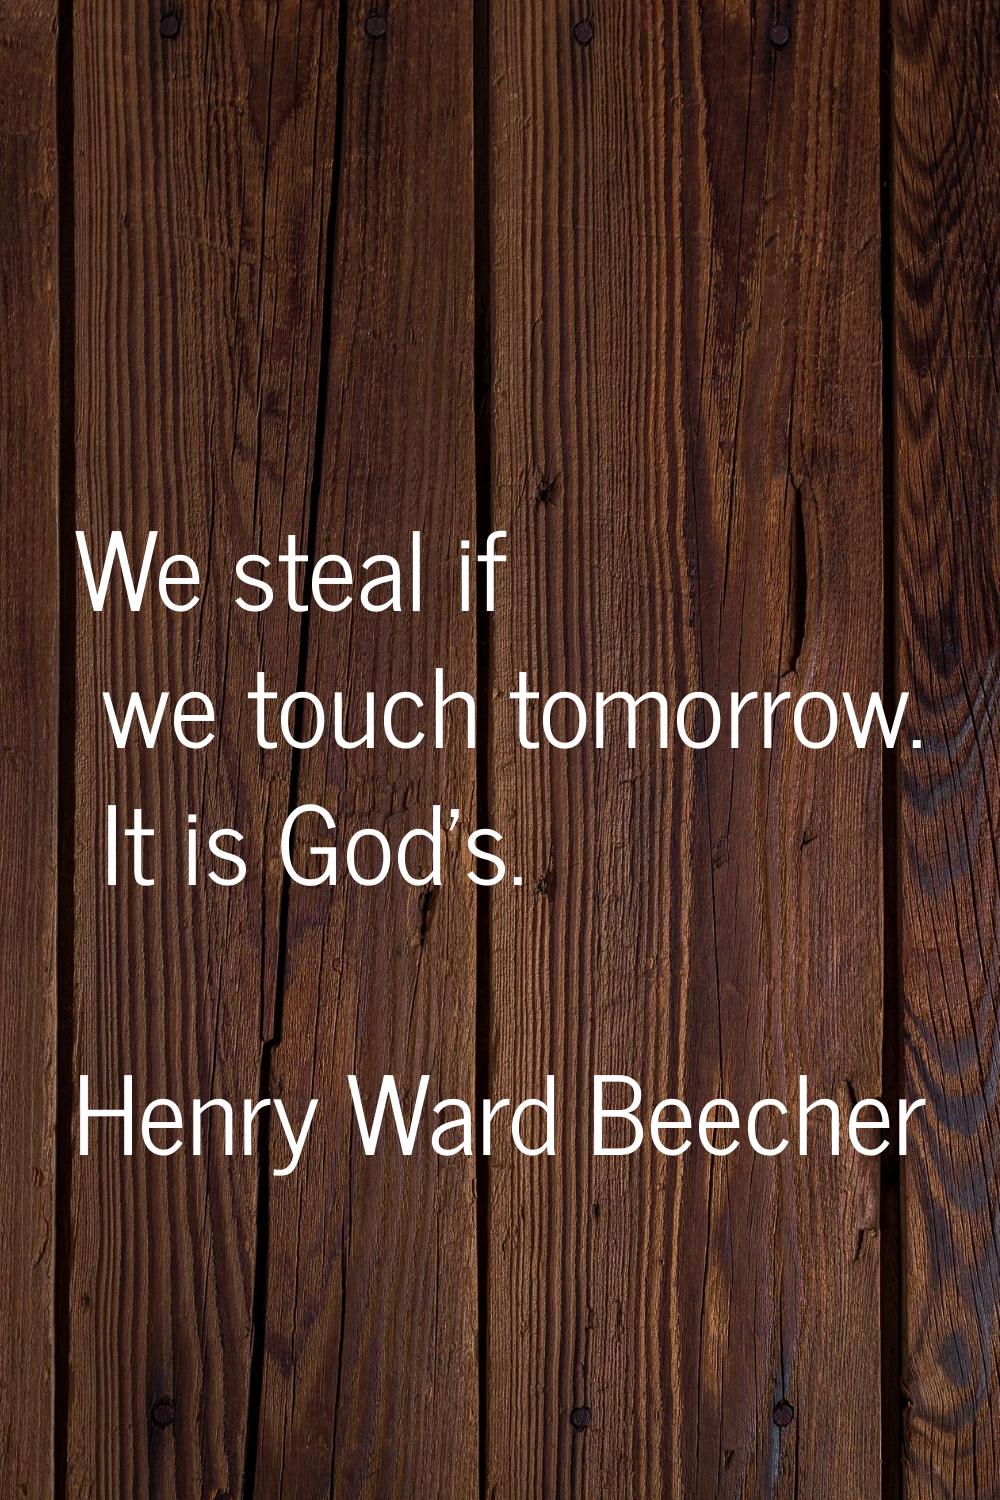 We steal if we touch tomorrow. It is God's.